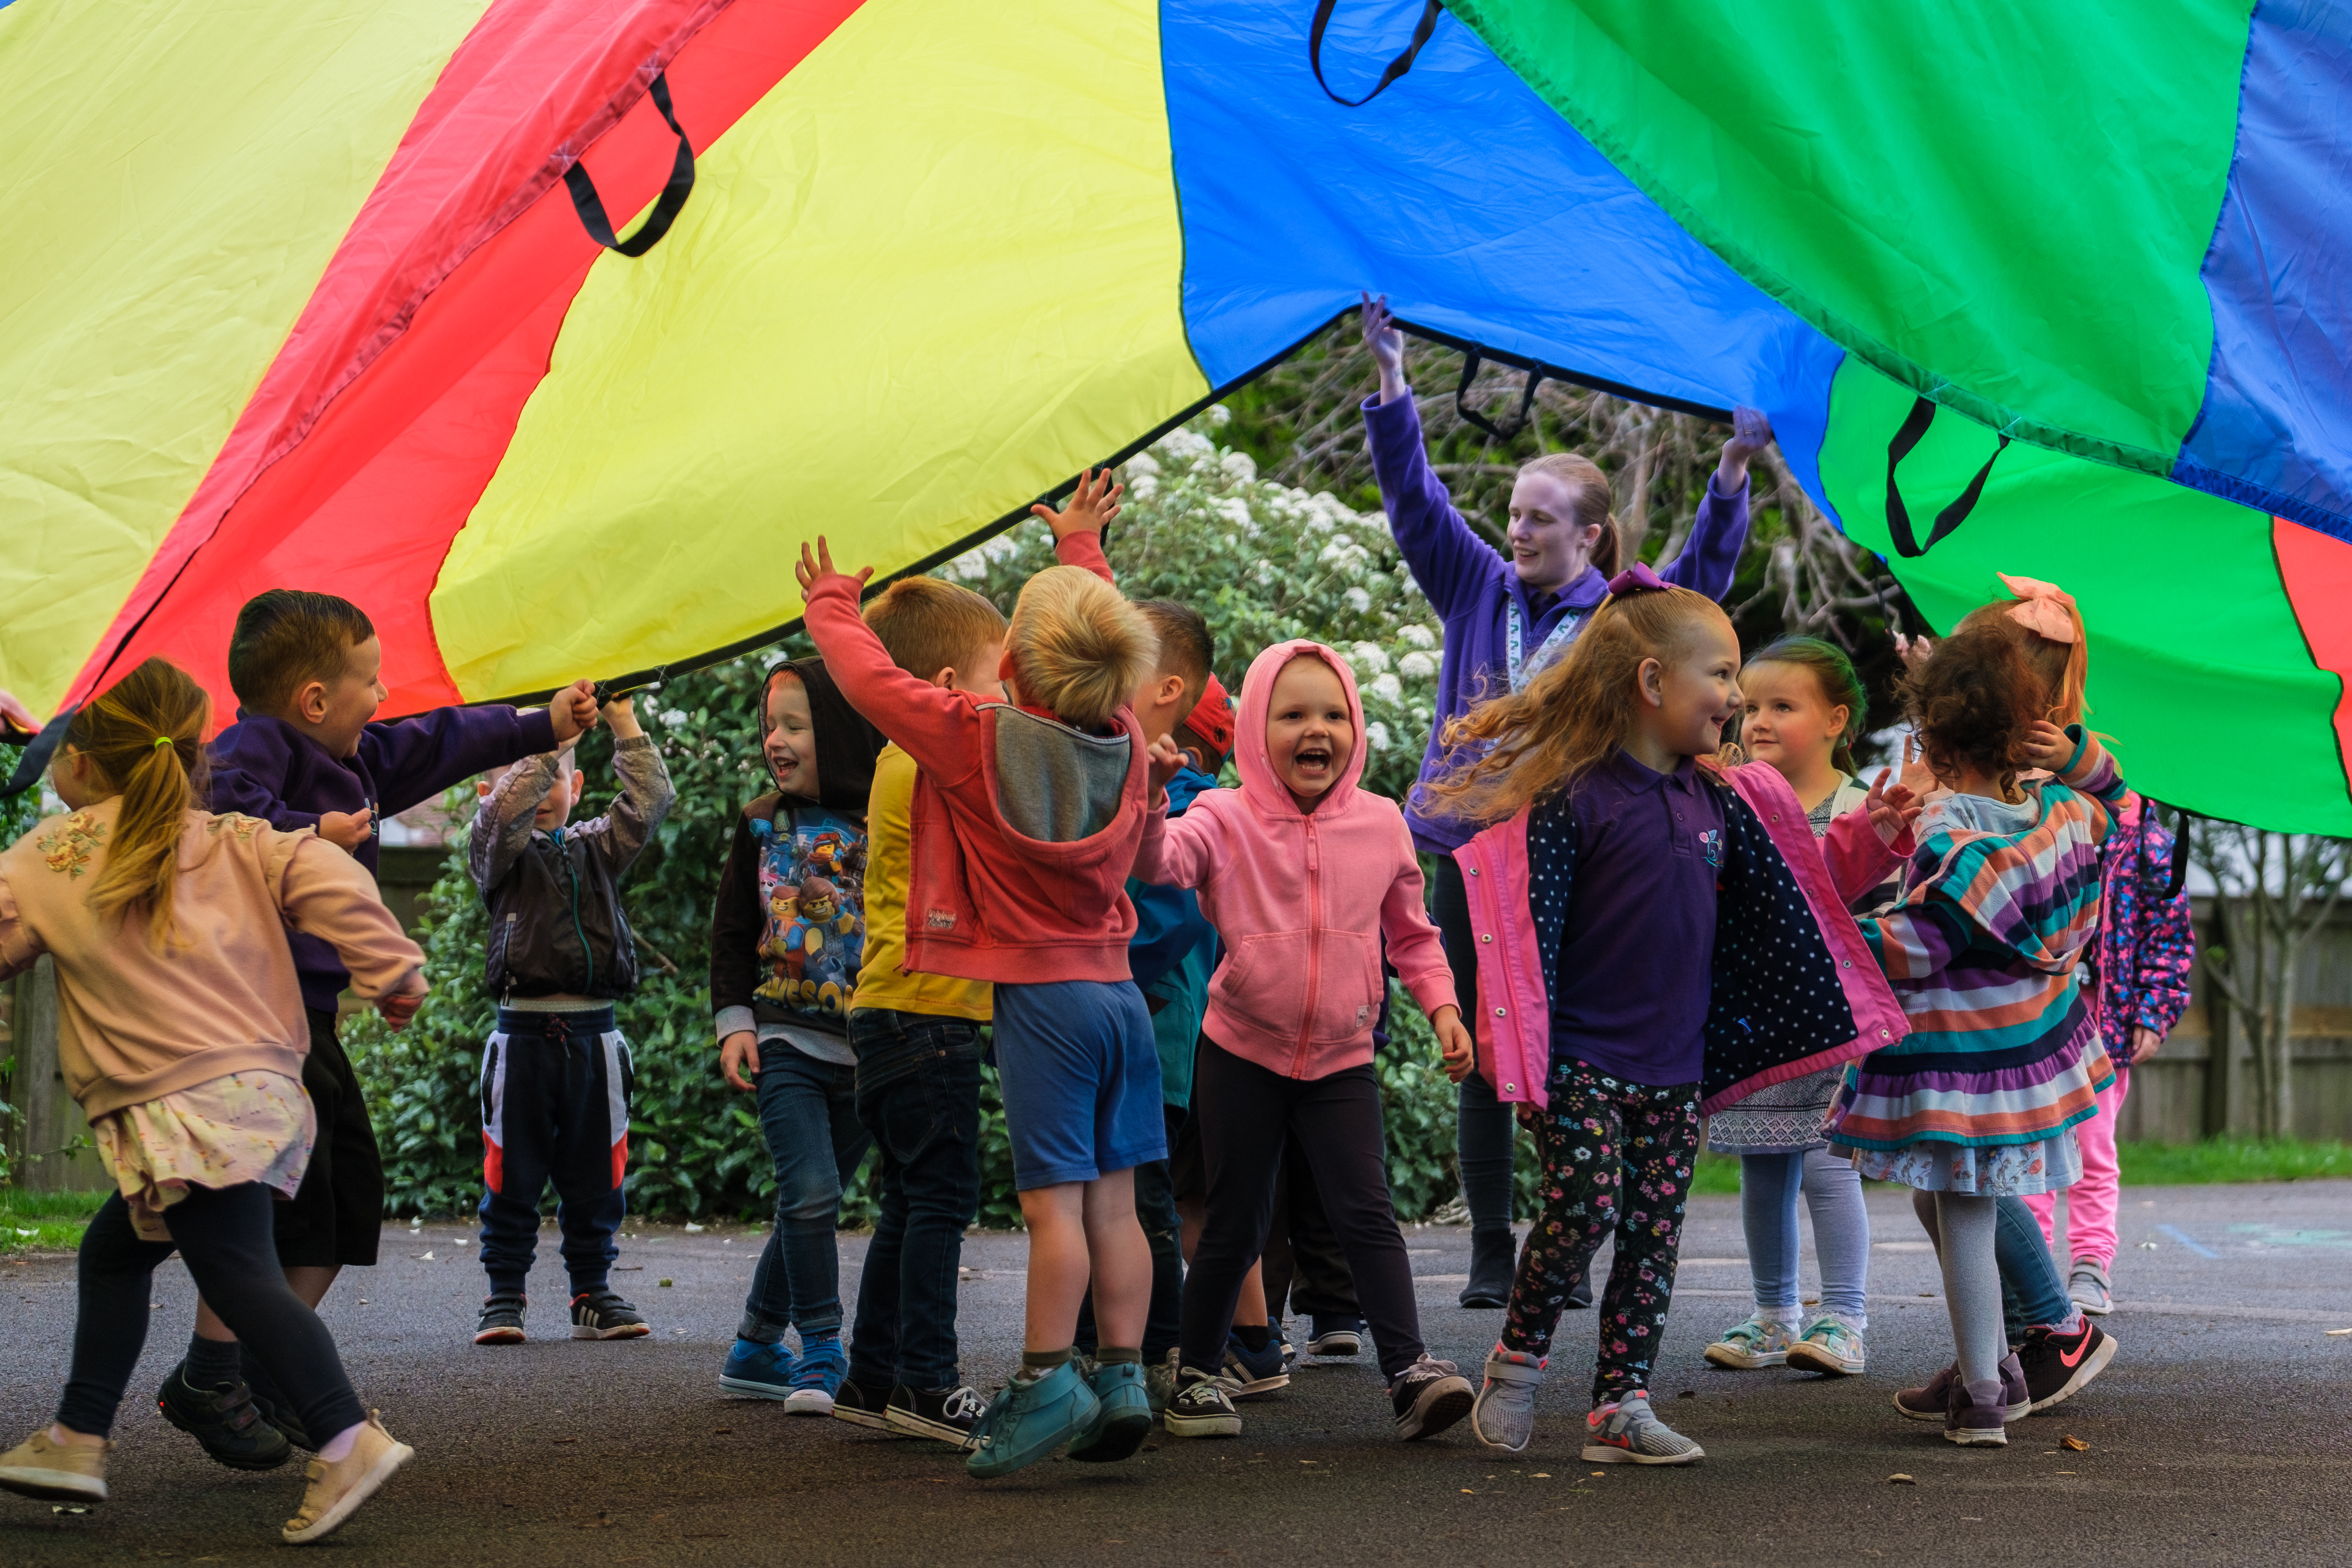 A group of young pre-school children are under a large rainbow coloured fabric circle  being used for a game in a playground. There is an adult supervising, they are smiling and active.